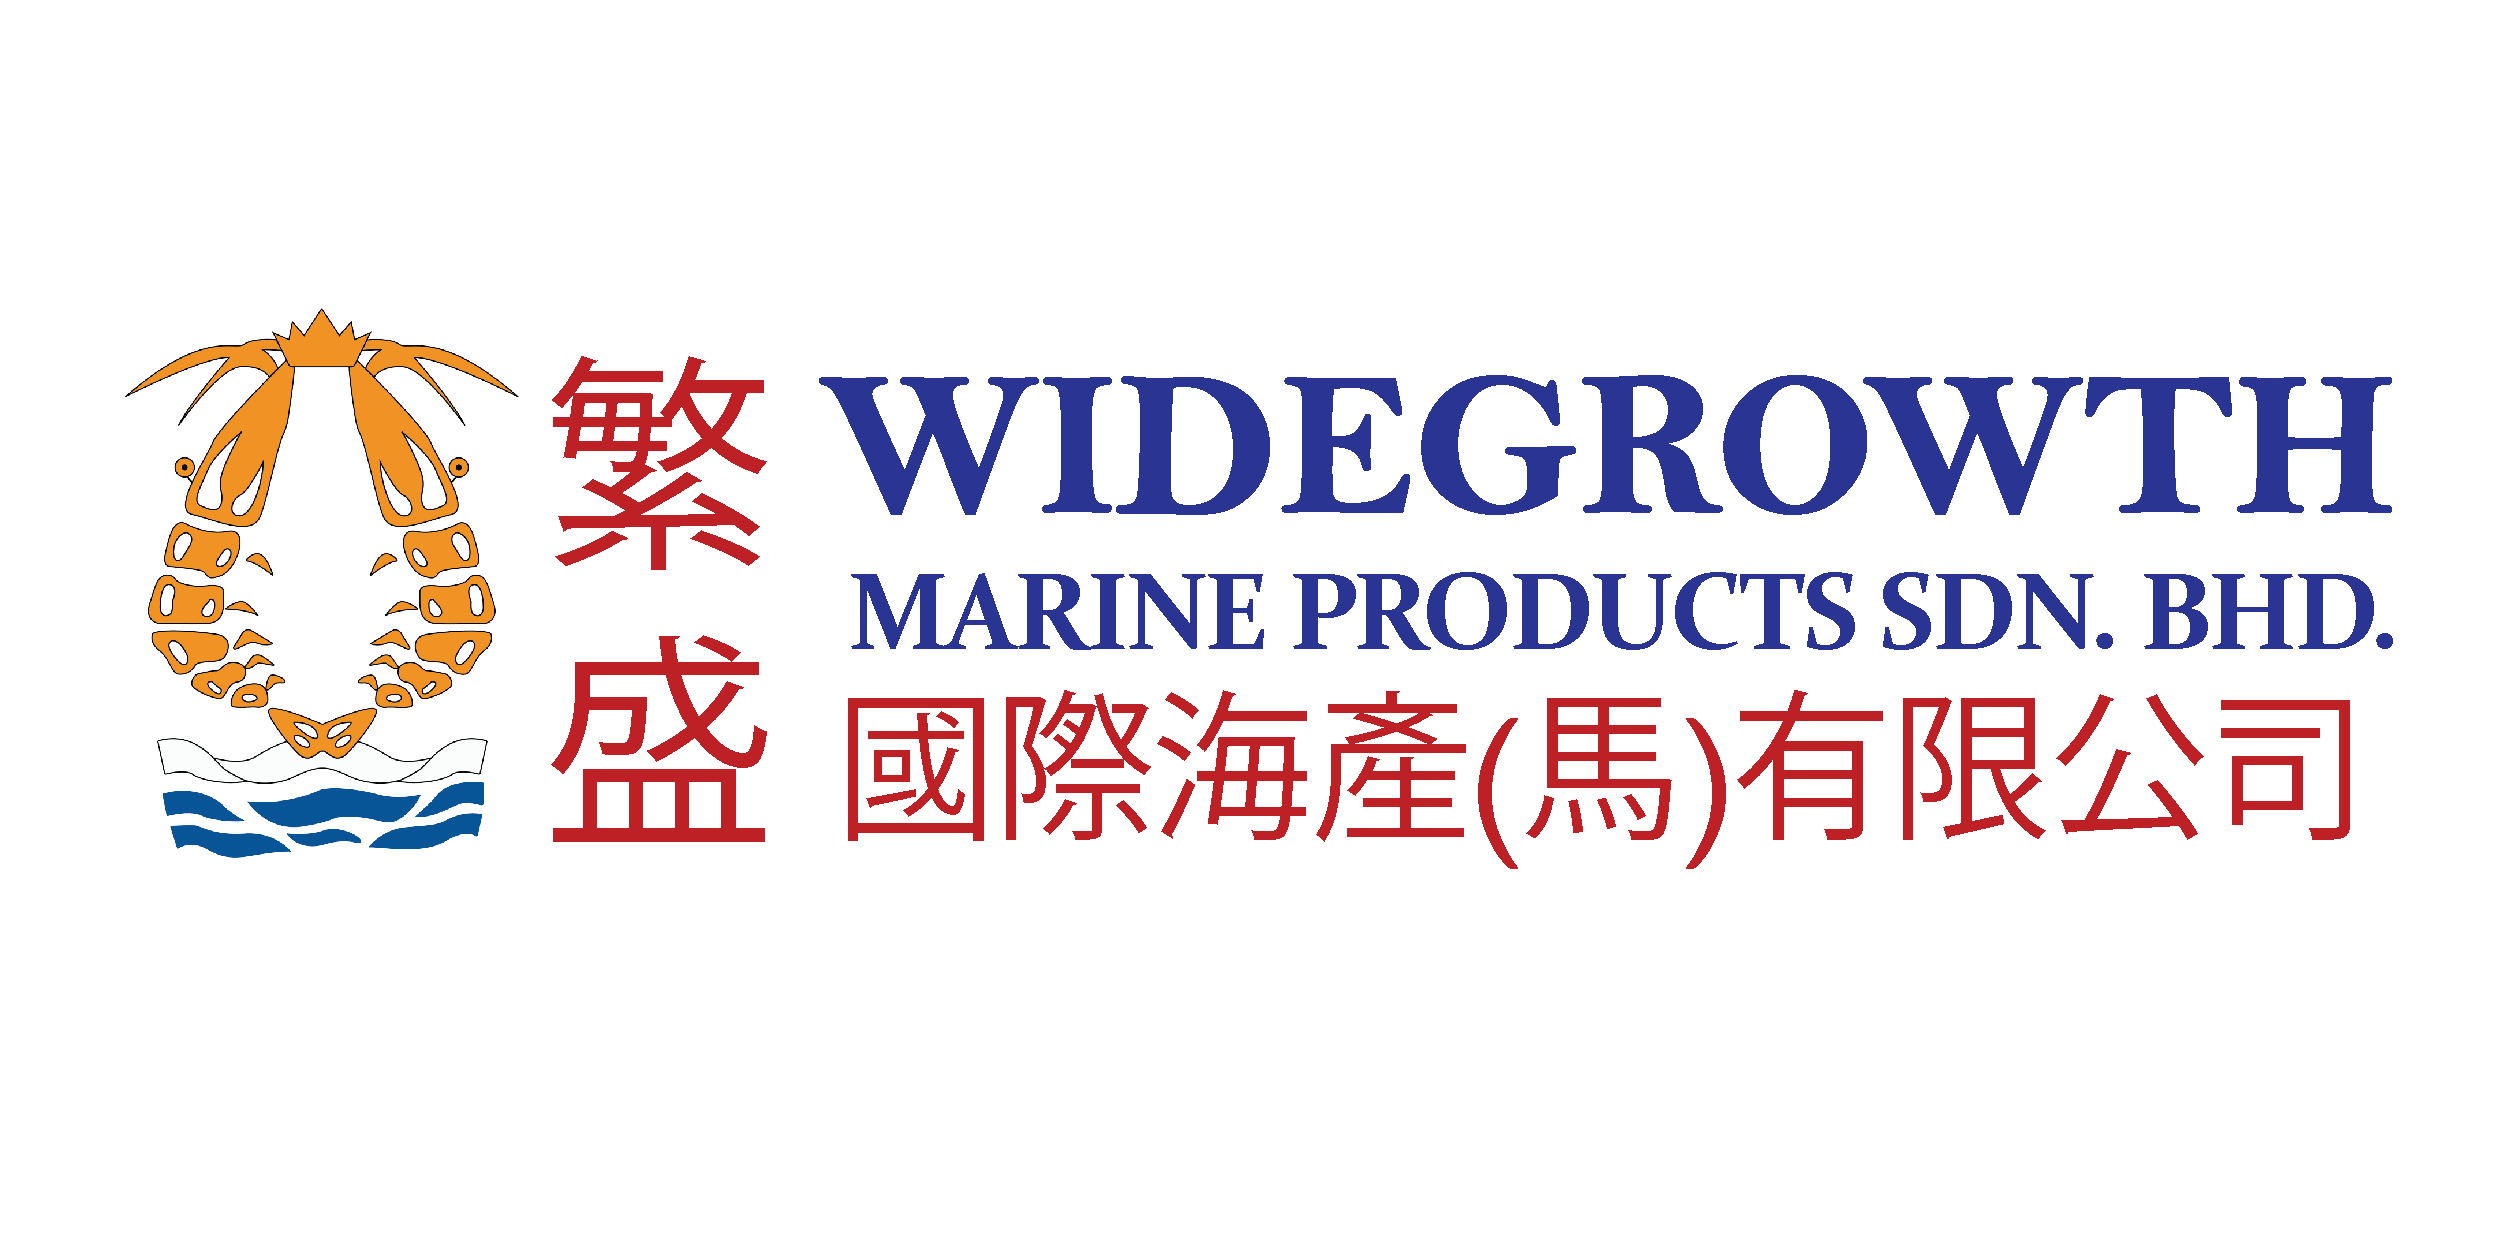 Home - Widegrowth Marine Products Sdn. Bhd.